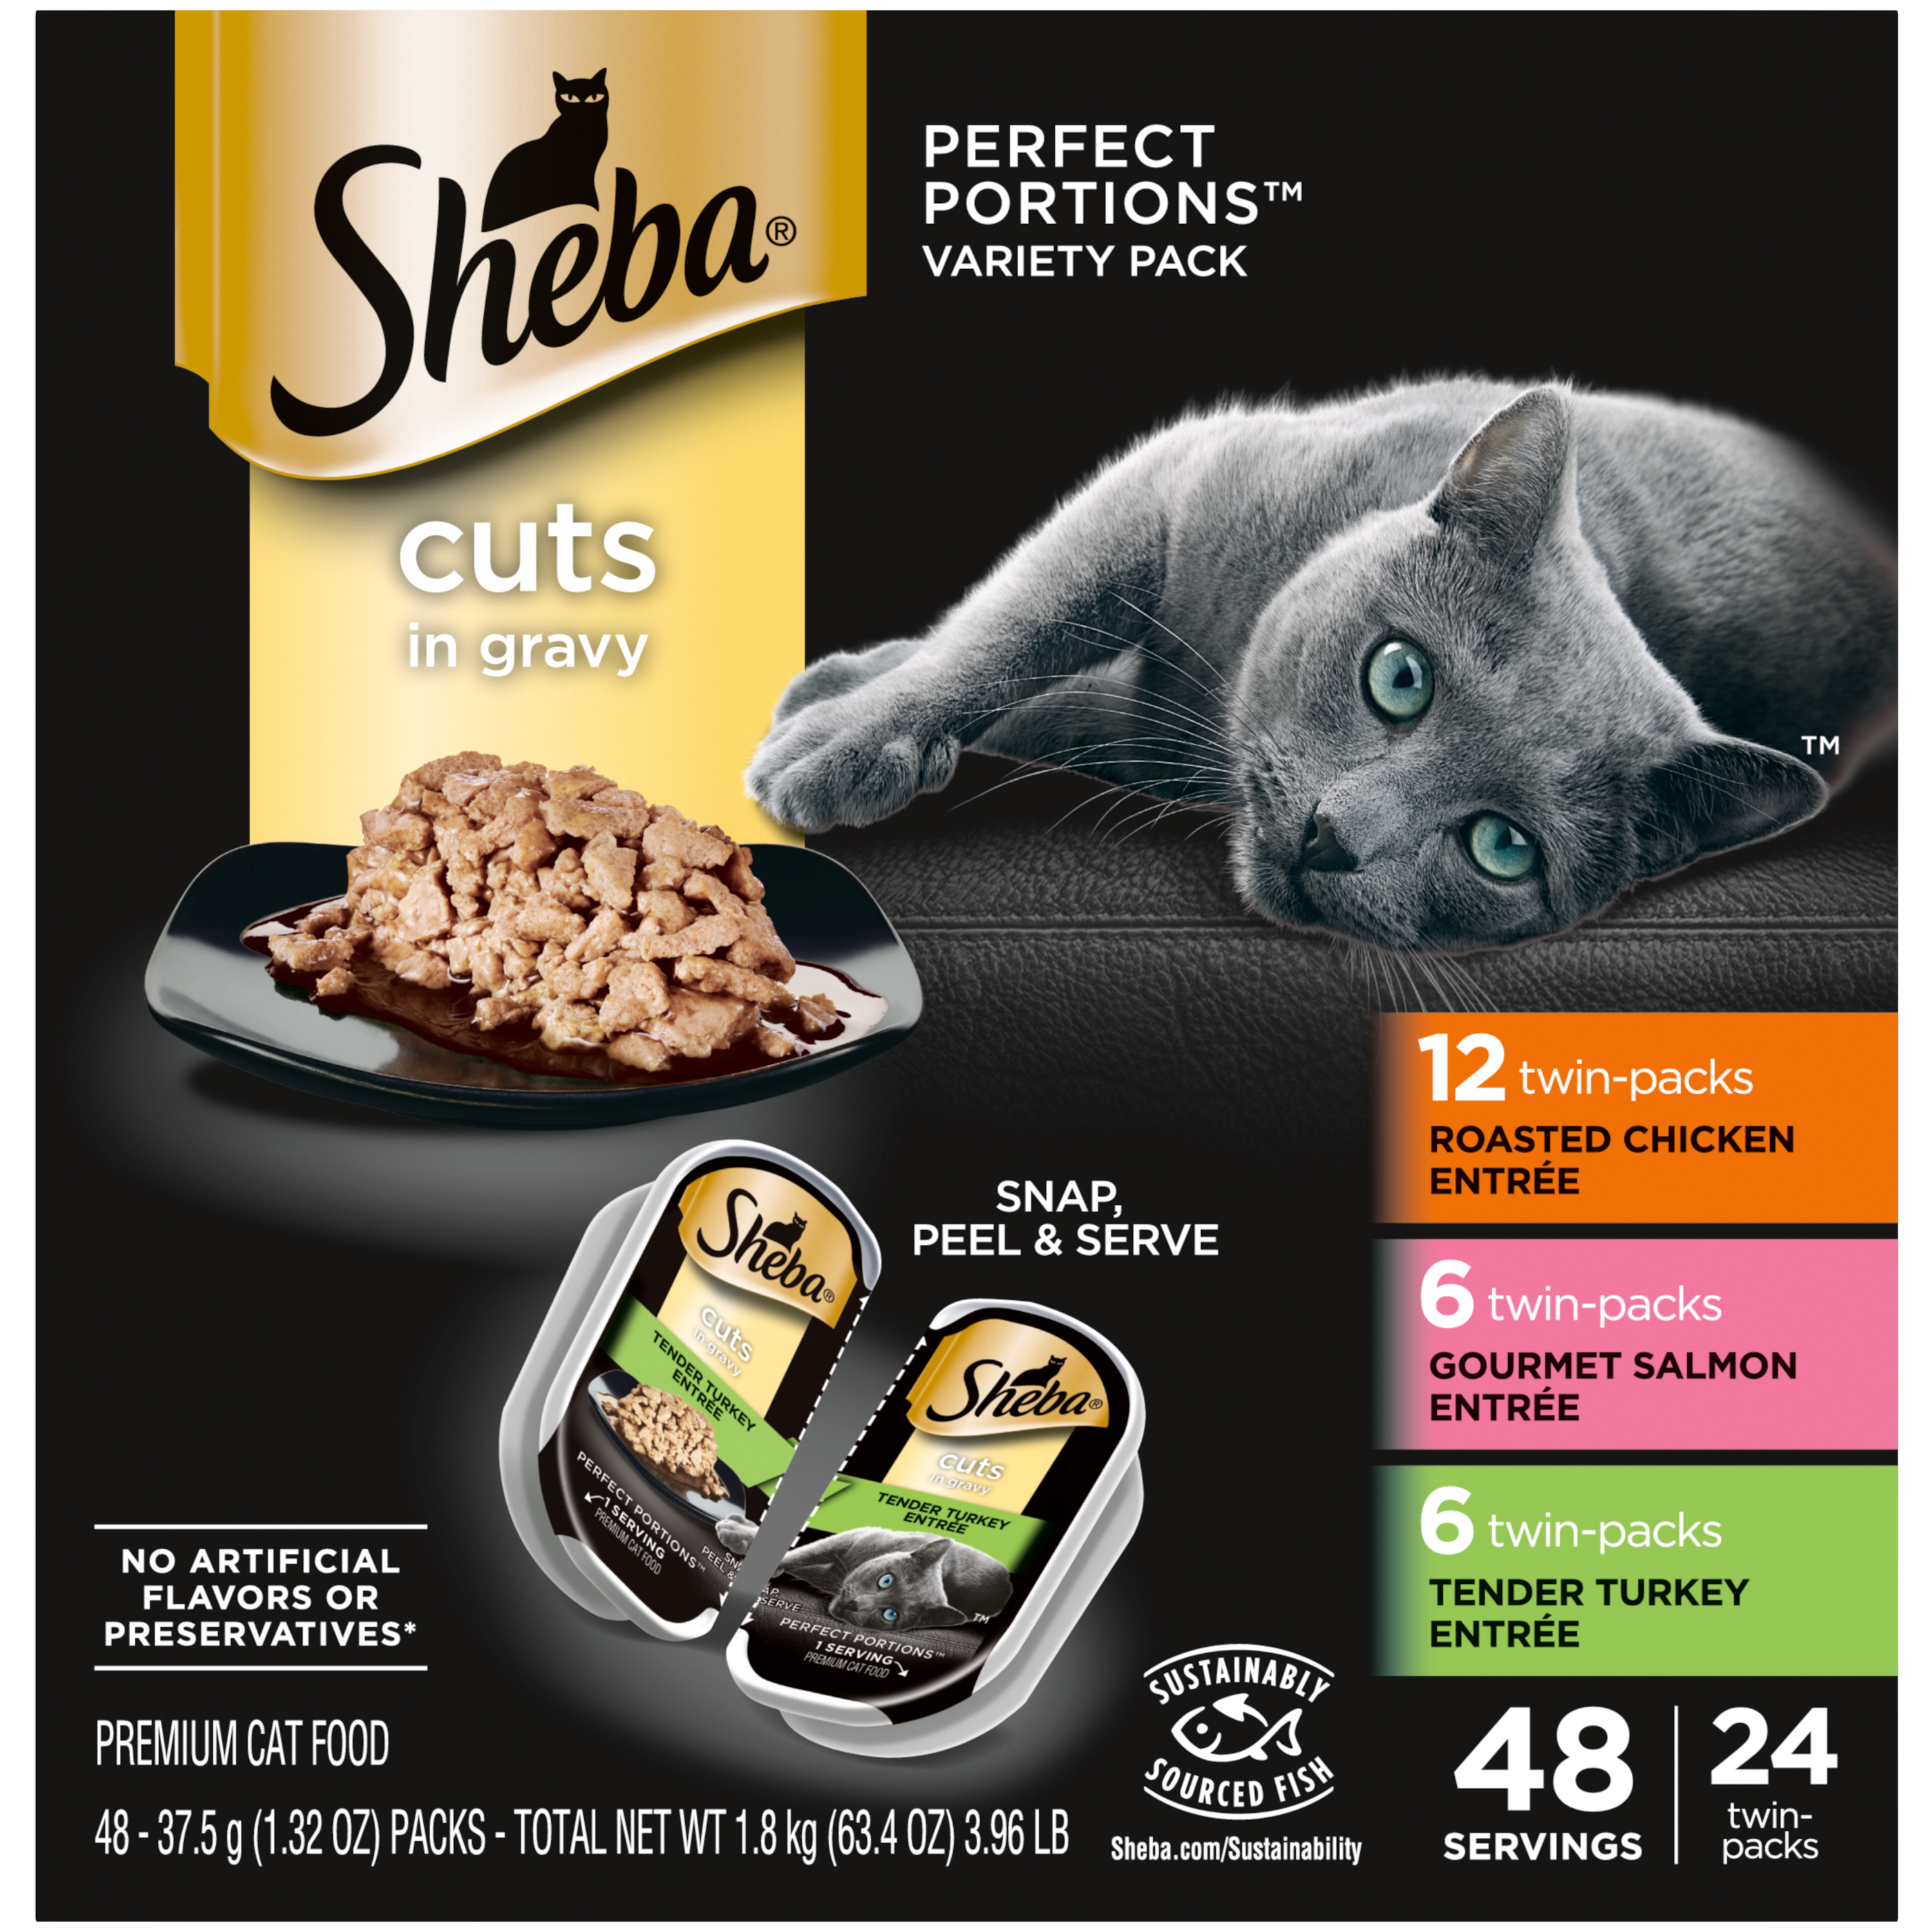 24/2.65 oz. Sheba Perfect Portions Cuts Chicken/Turkey/Salmon Multi Pack - Health/First Aid